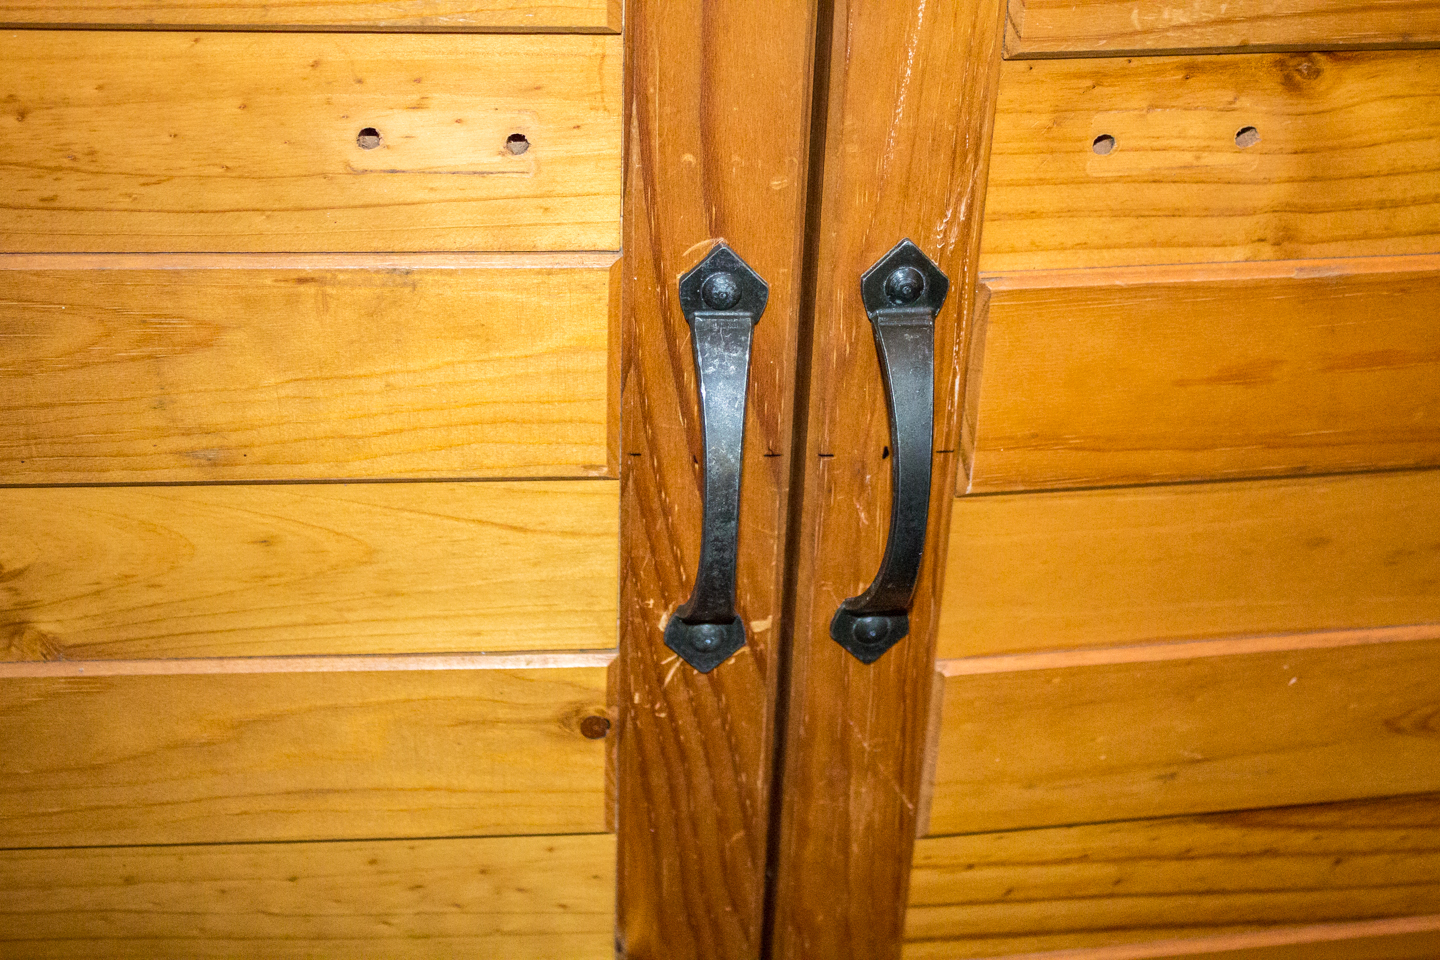 02/01/16 Day 8: [Working Day 3 ] Close up of the door handles we installed.